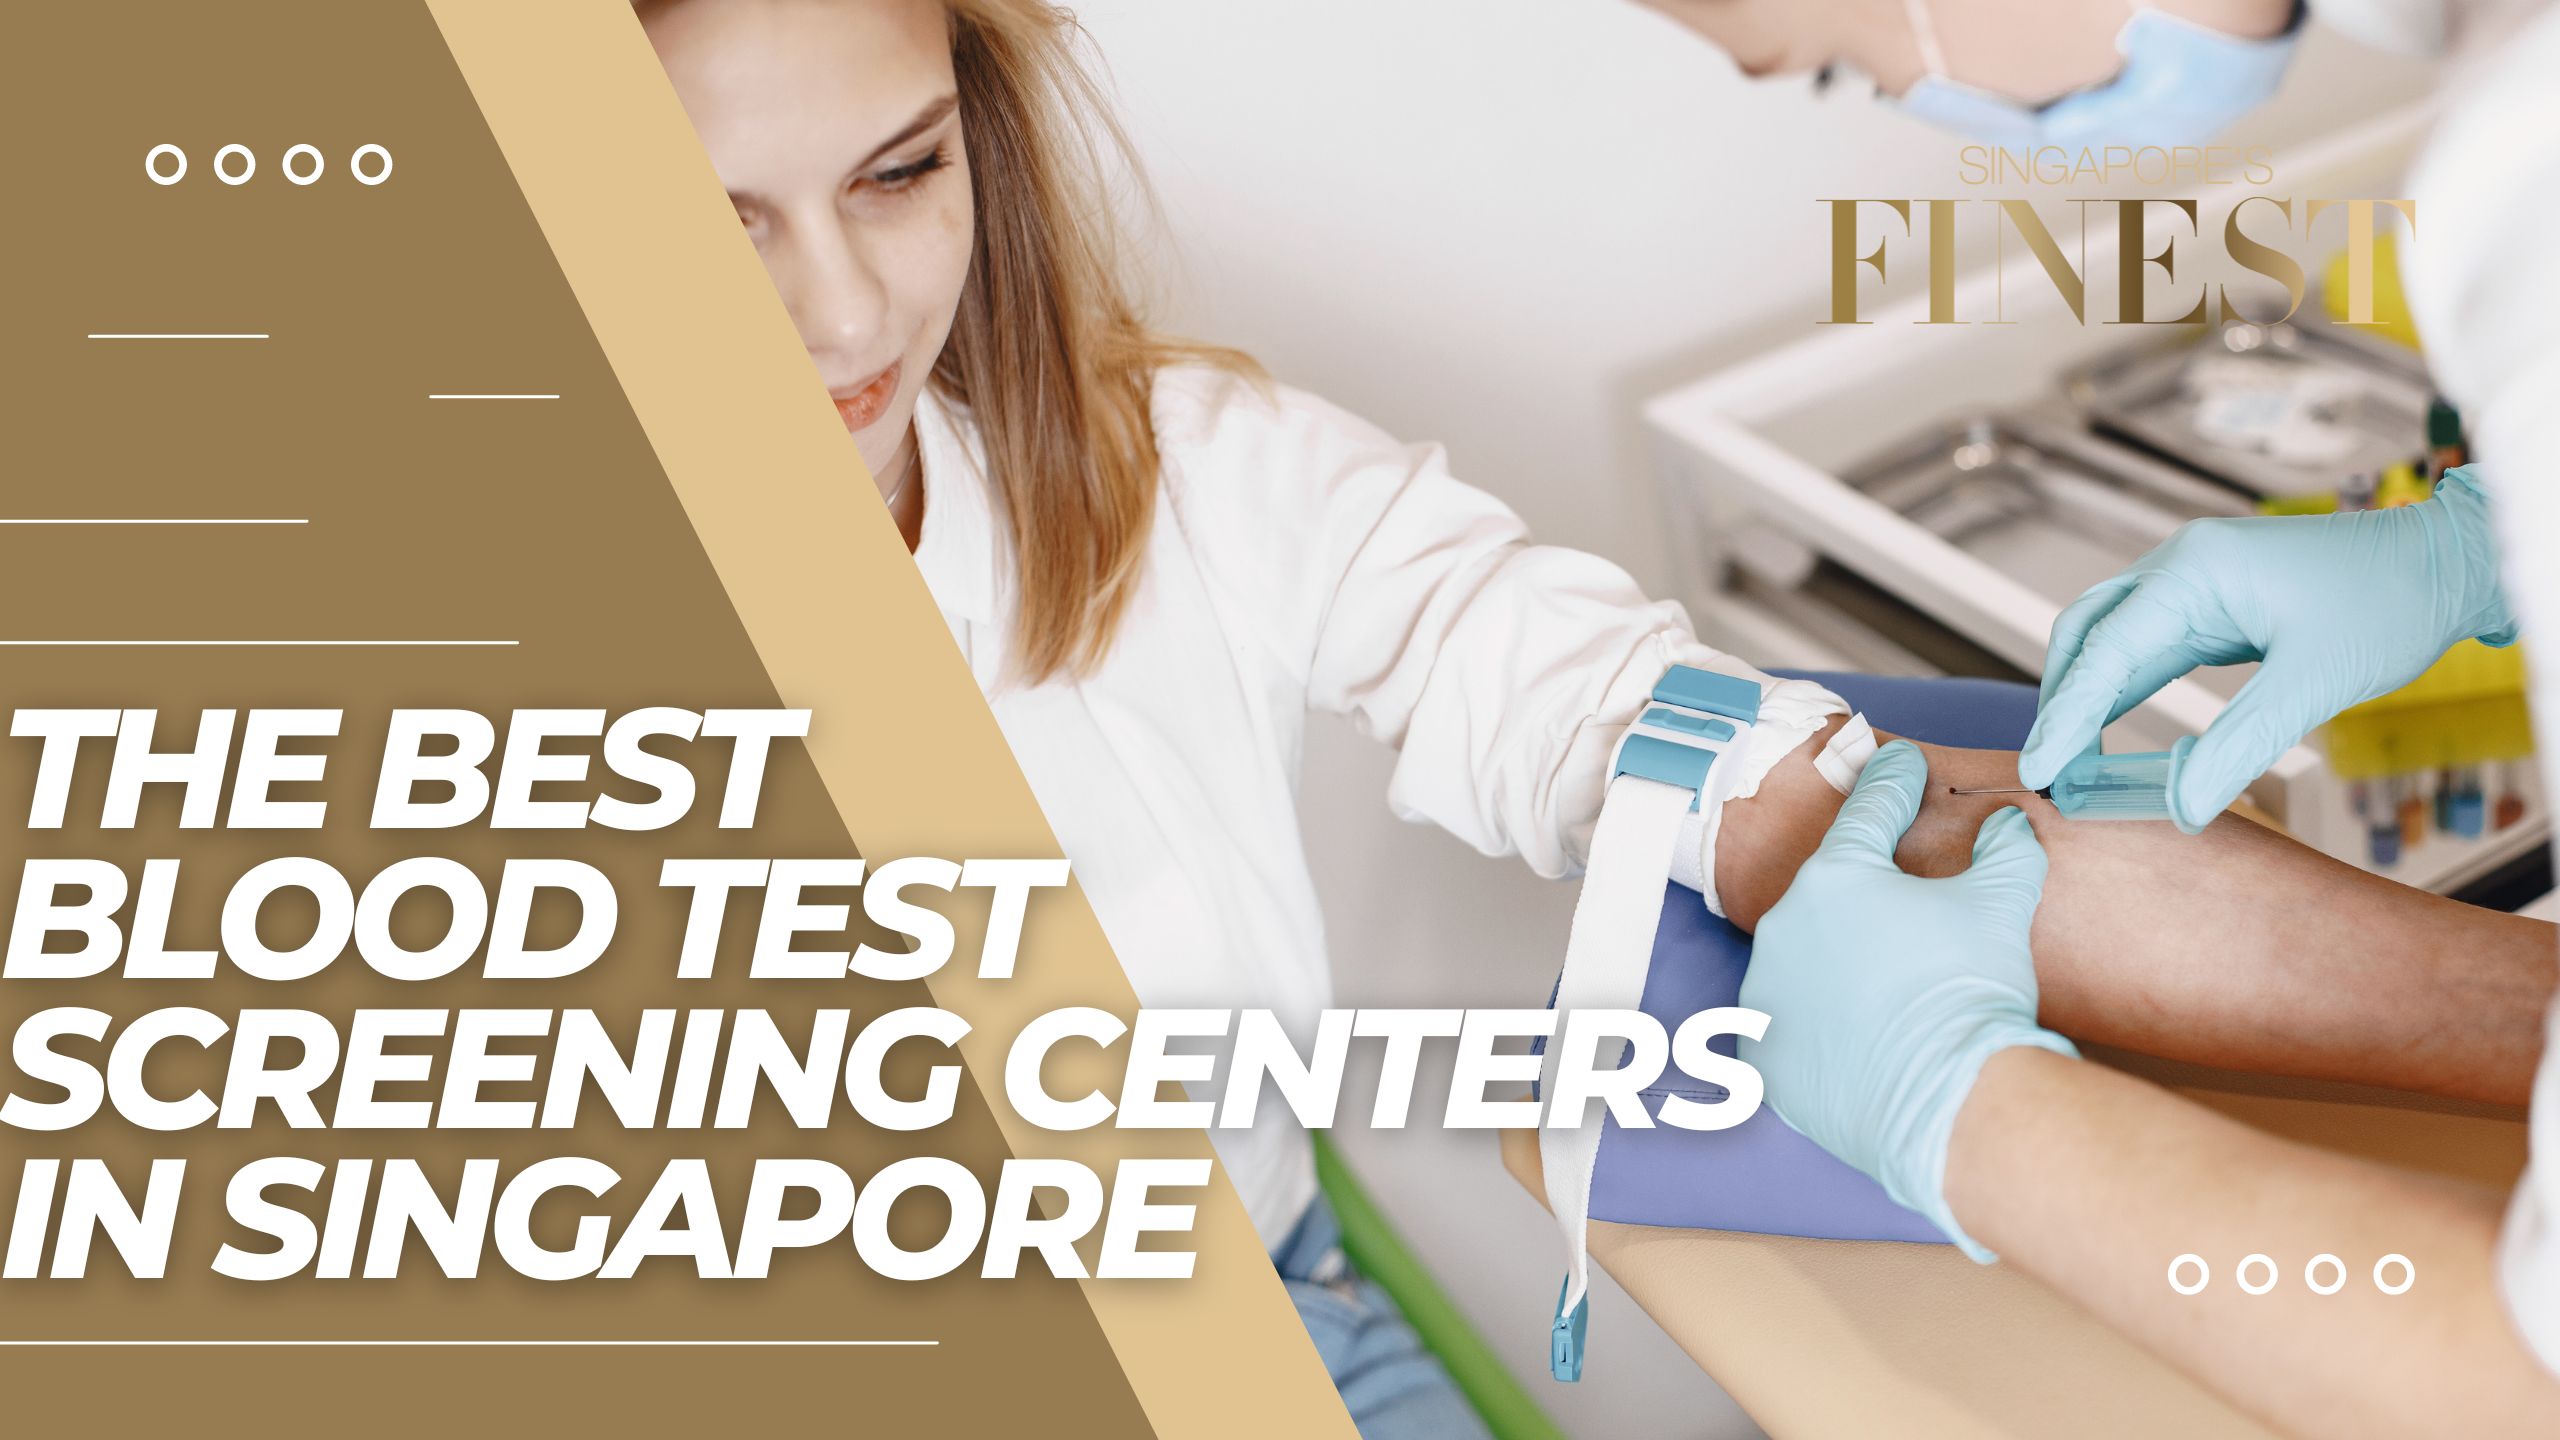 The Finest Blood Test Screening Centers in Singapore